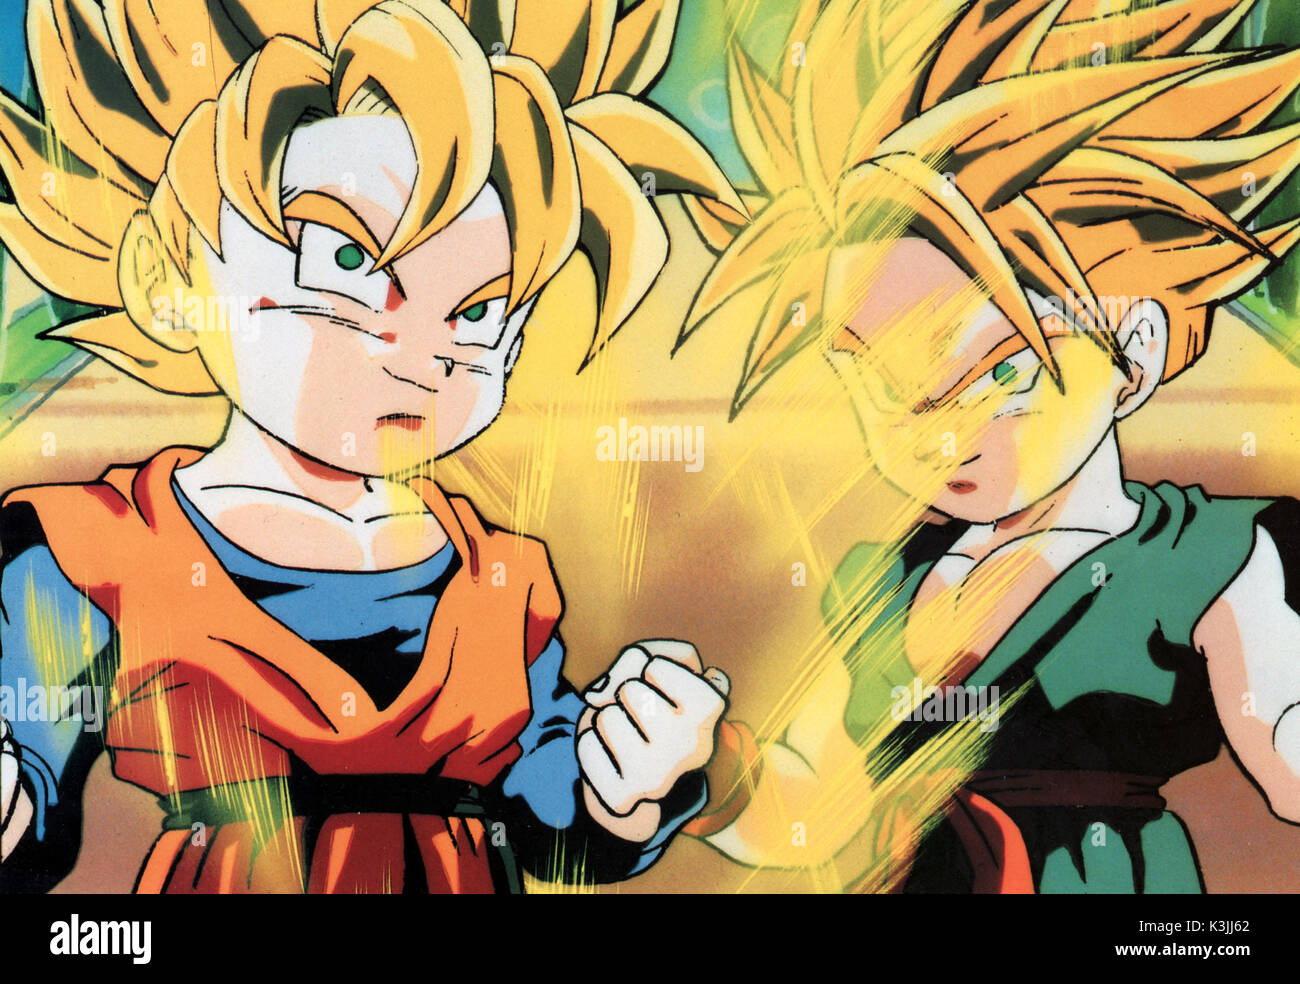 Dragon ball super manga 21 Color (second image) by bolman2003JUMP Dragon  ball super, Dragon ball super manga, Anime dragon ball super, super manga 